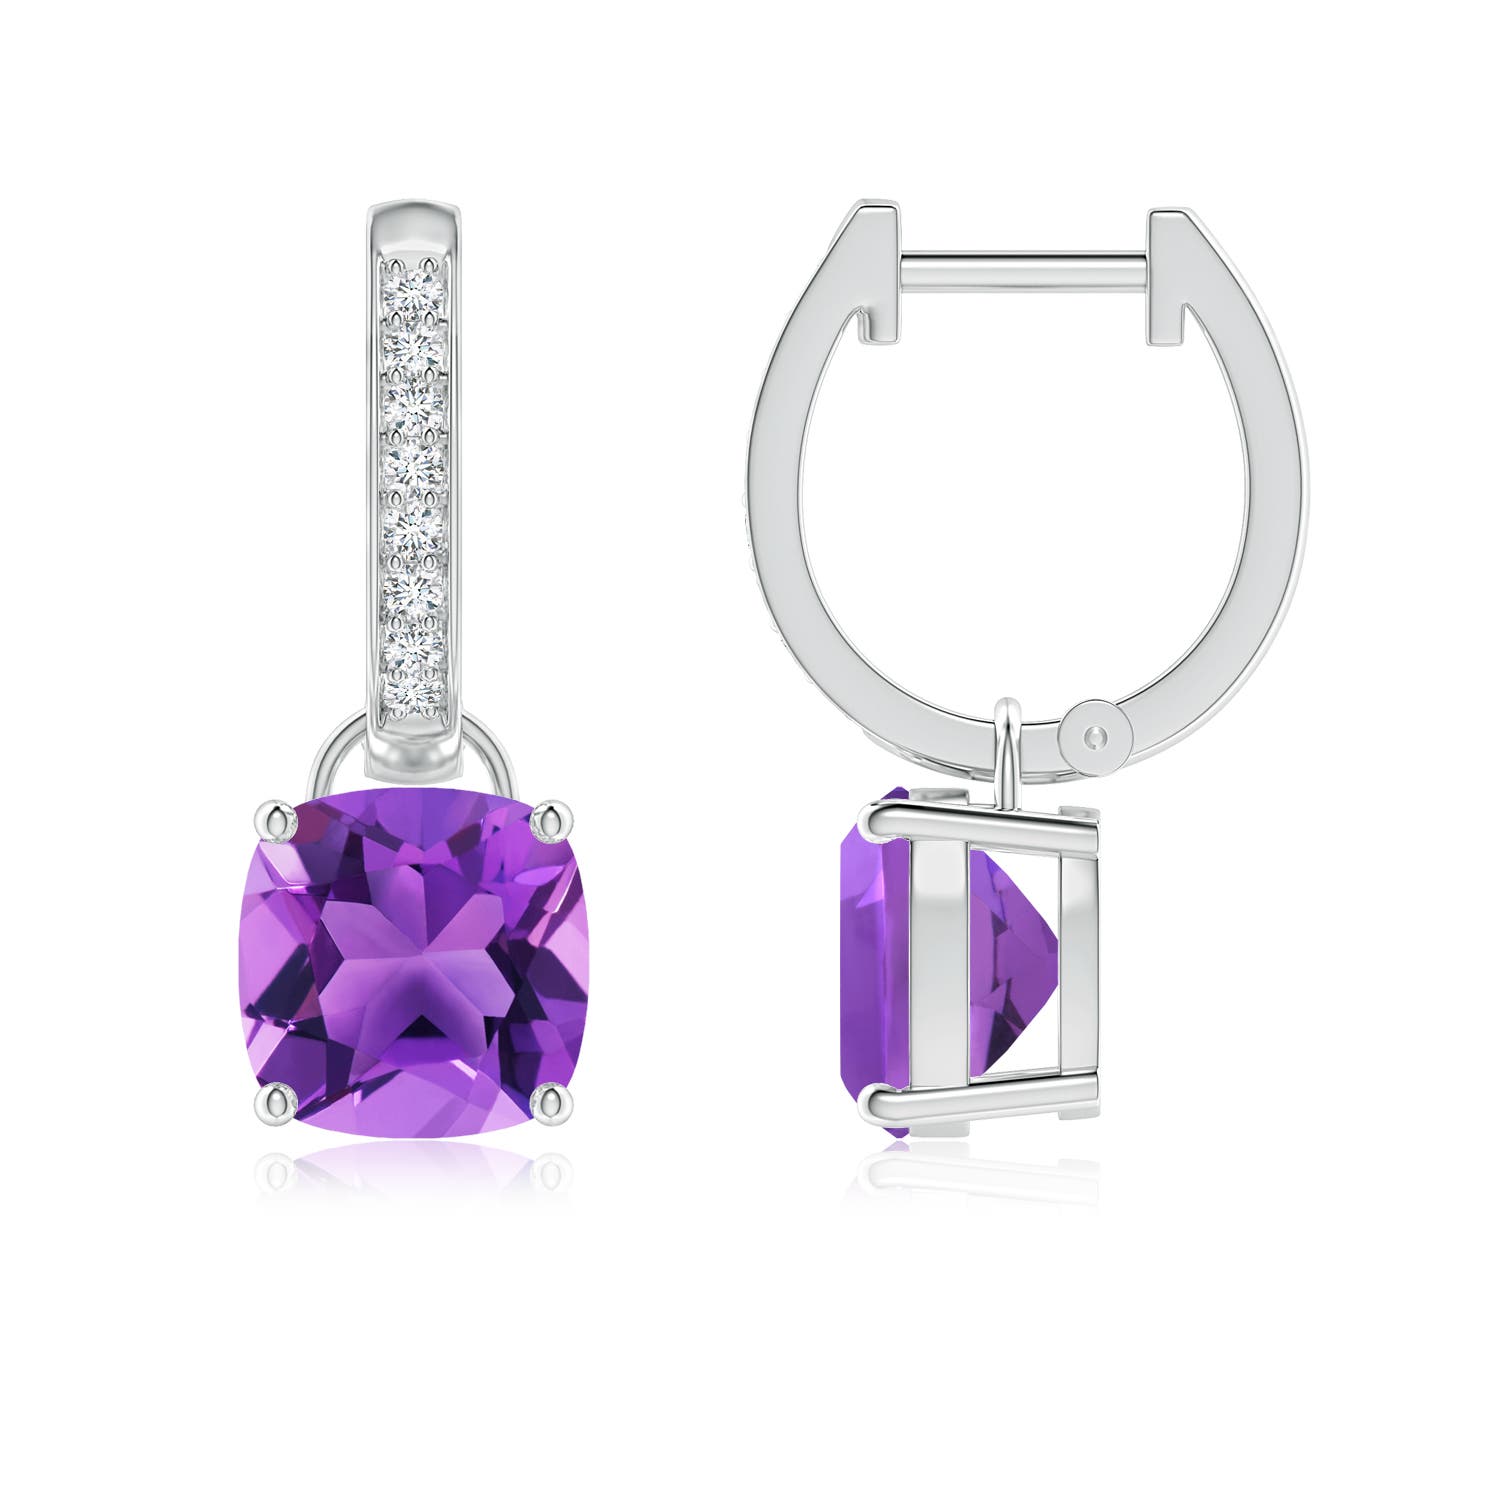 AAA - Amethyst / 2.83 CT / 14 KT White Gold